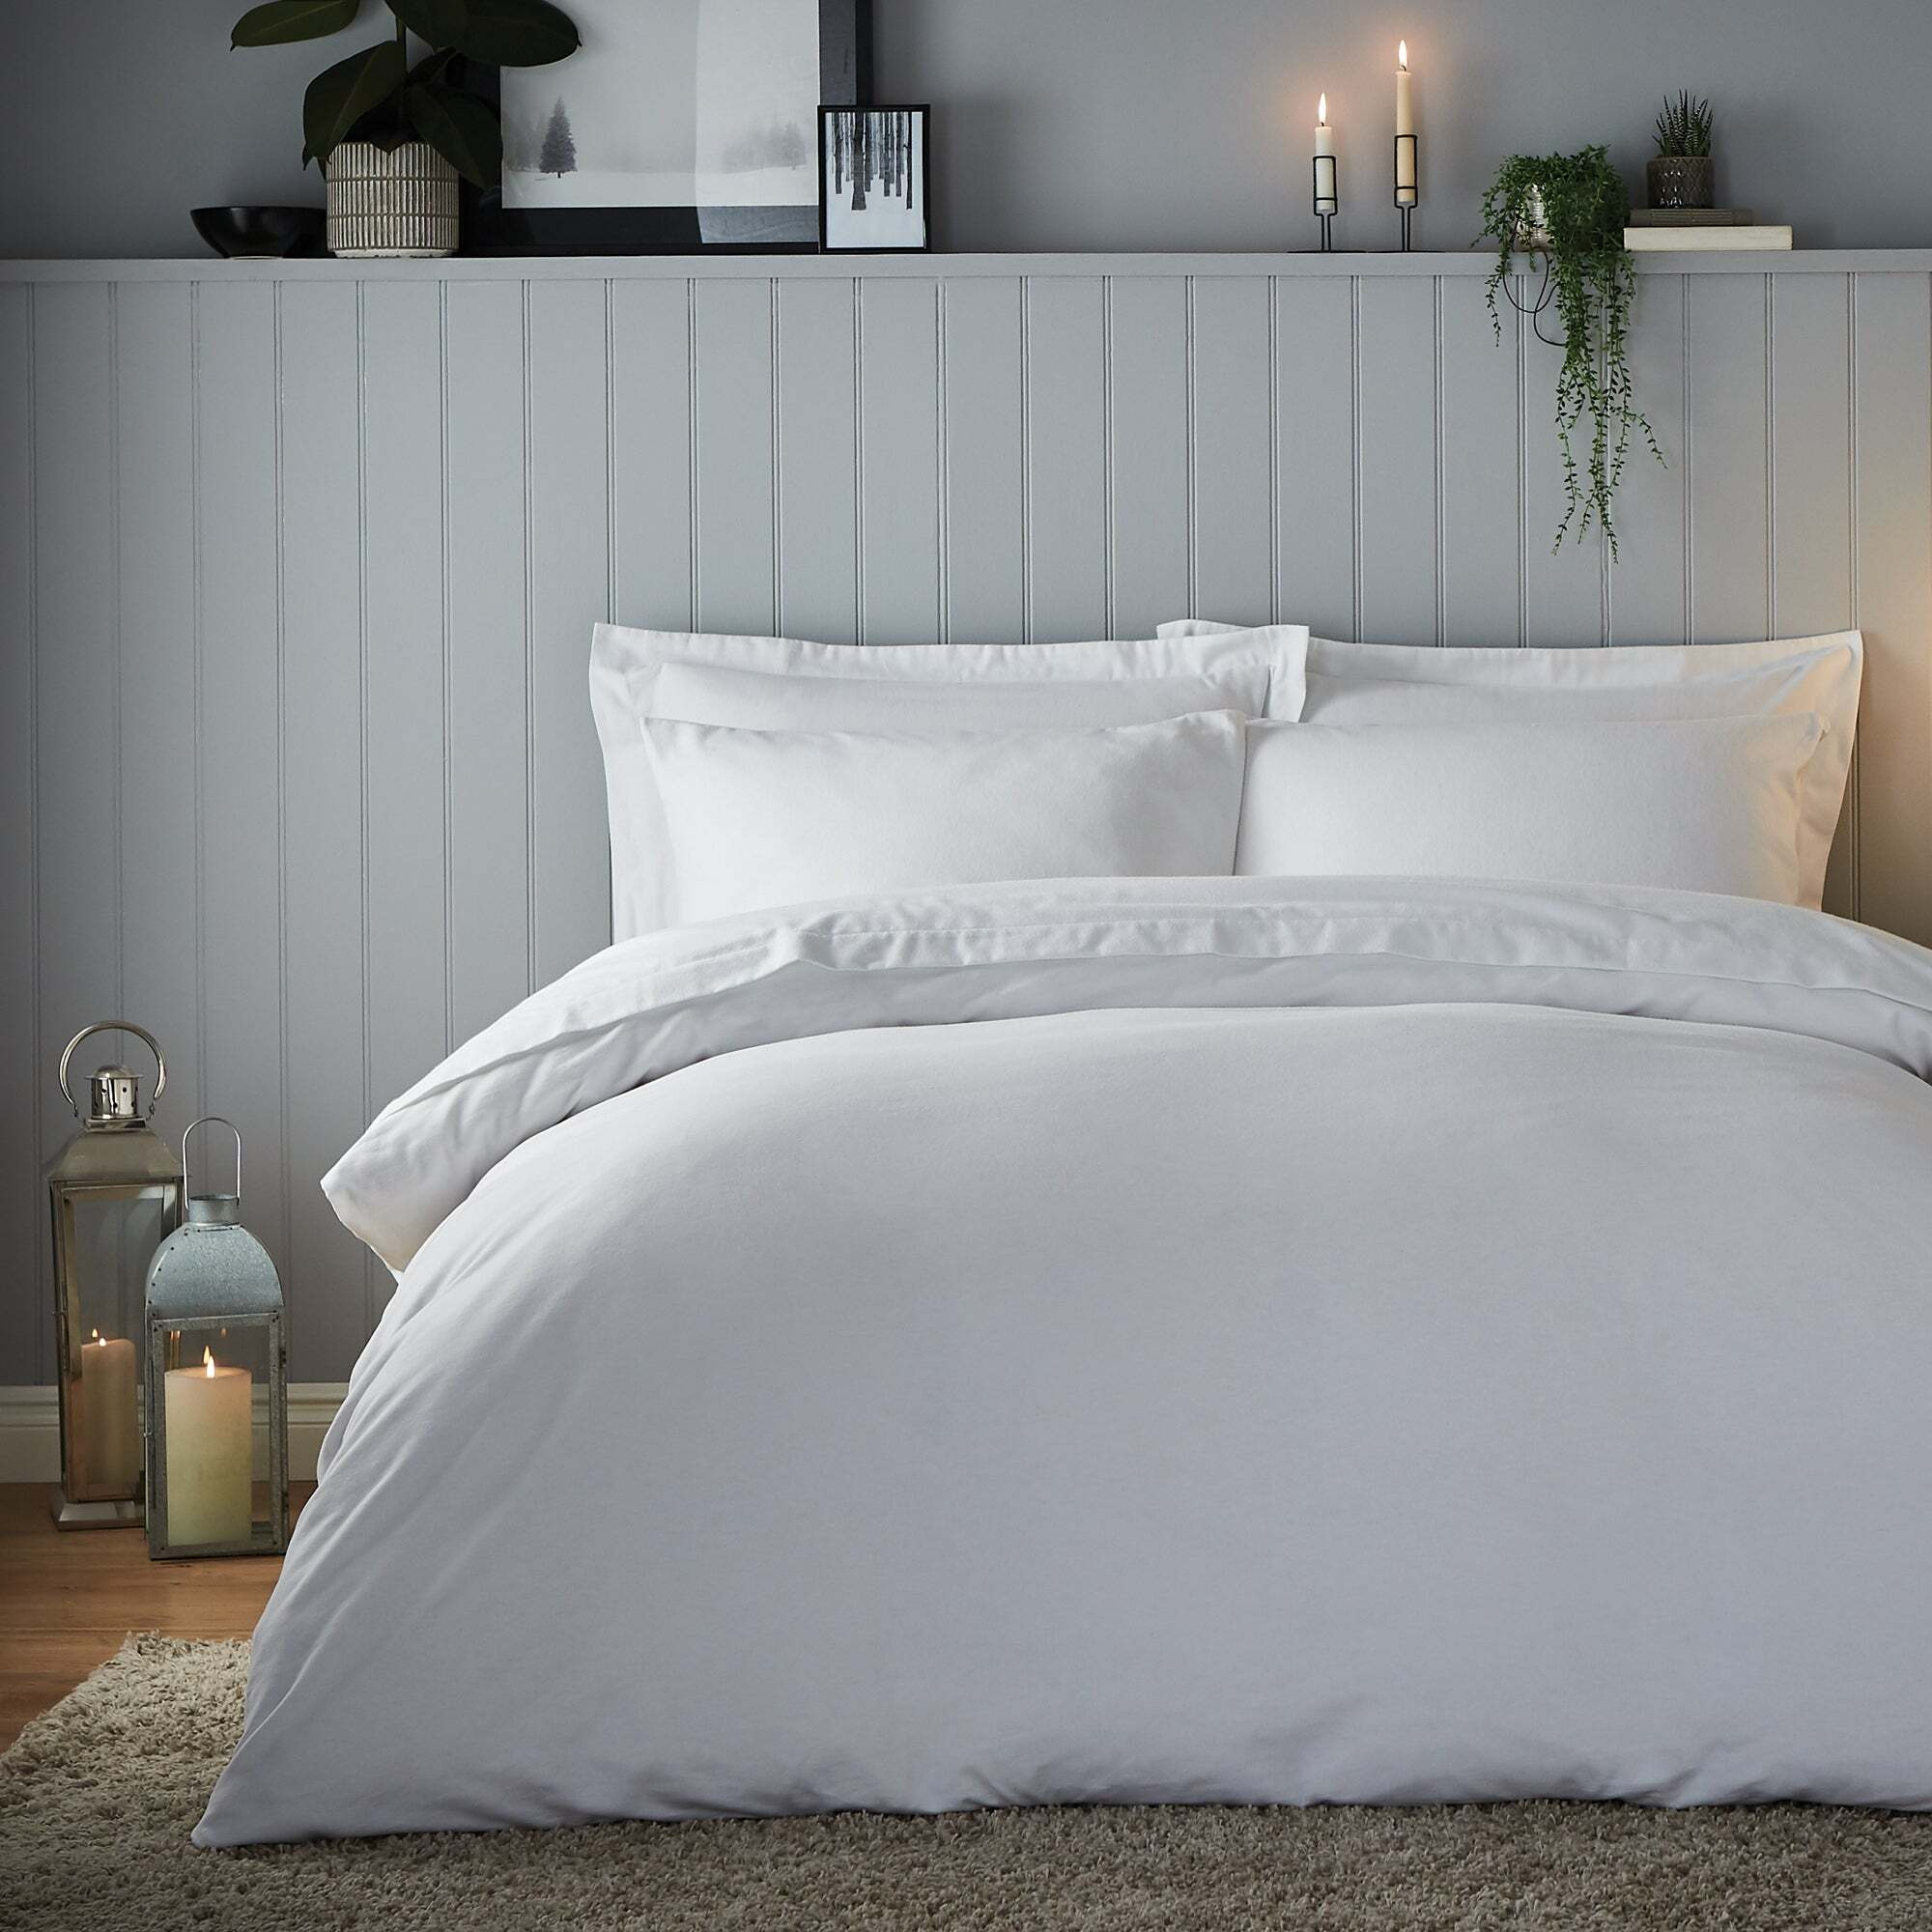 Soft & Cosy Luxury Brushed Cotton White Duvet Cover and Pillowcase Set White